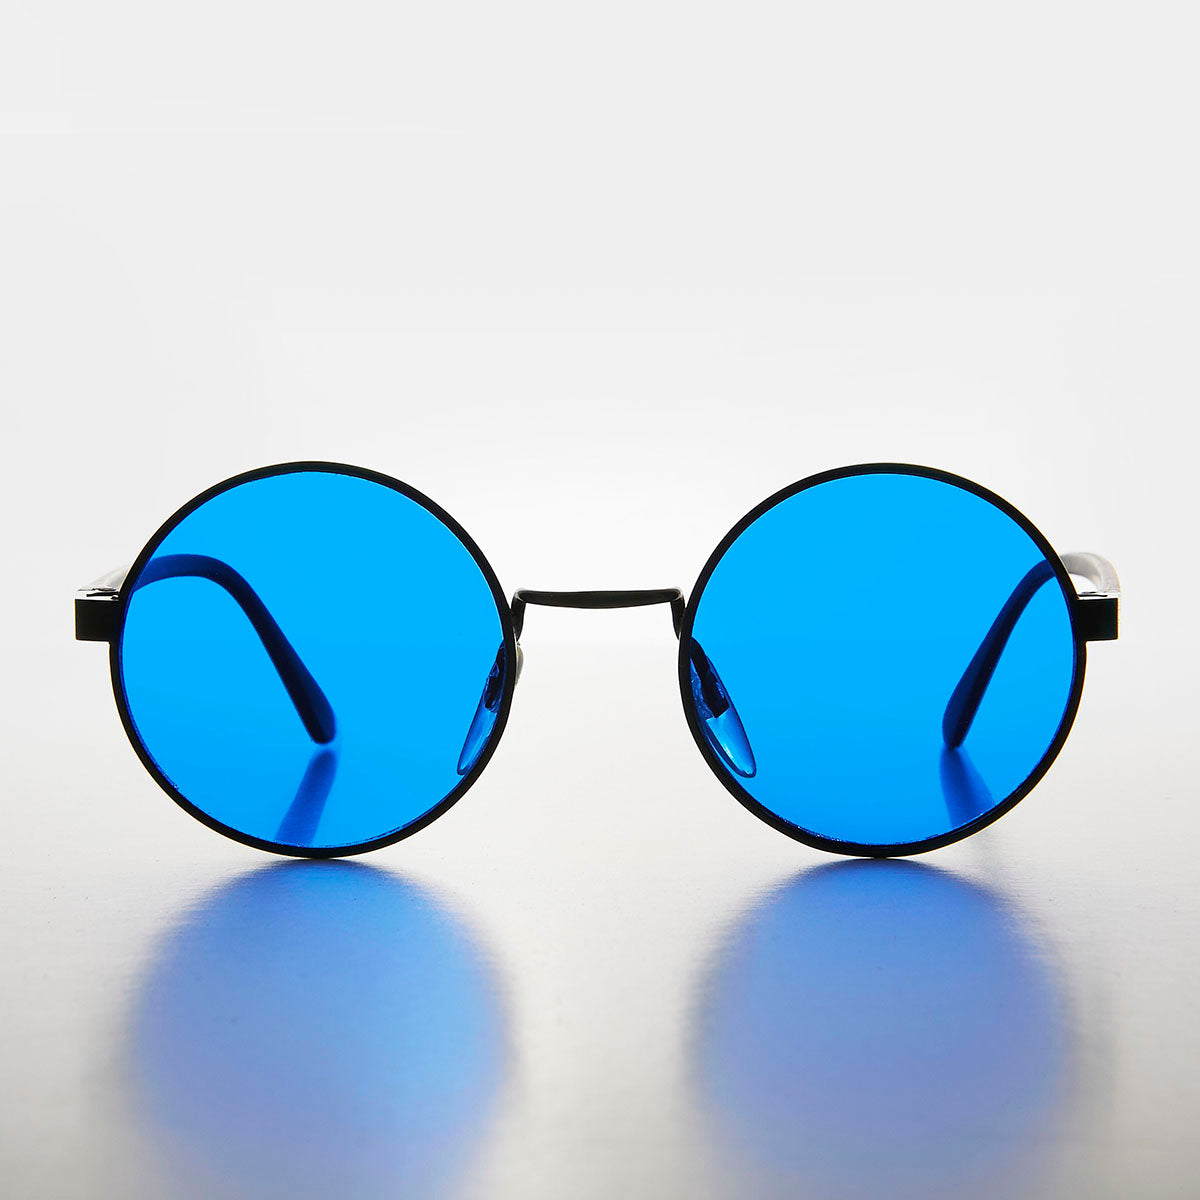 Round Hippie Sunglass with Blue Colored Lenses